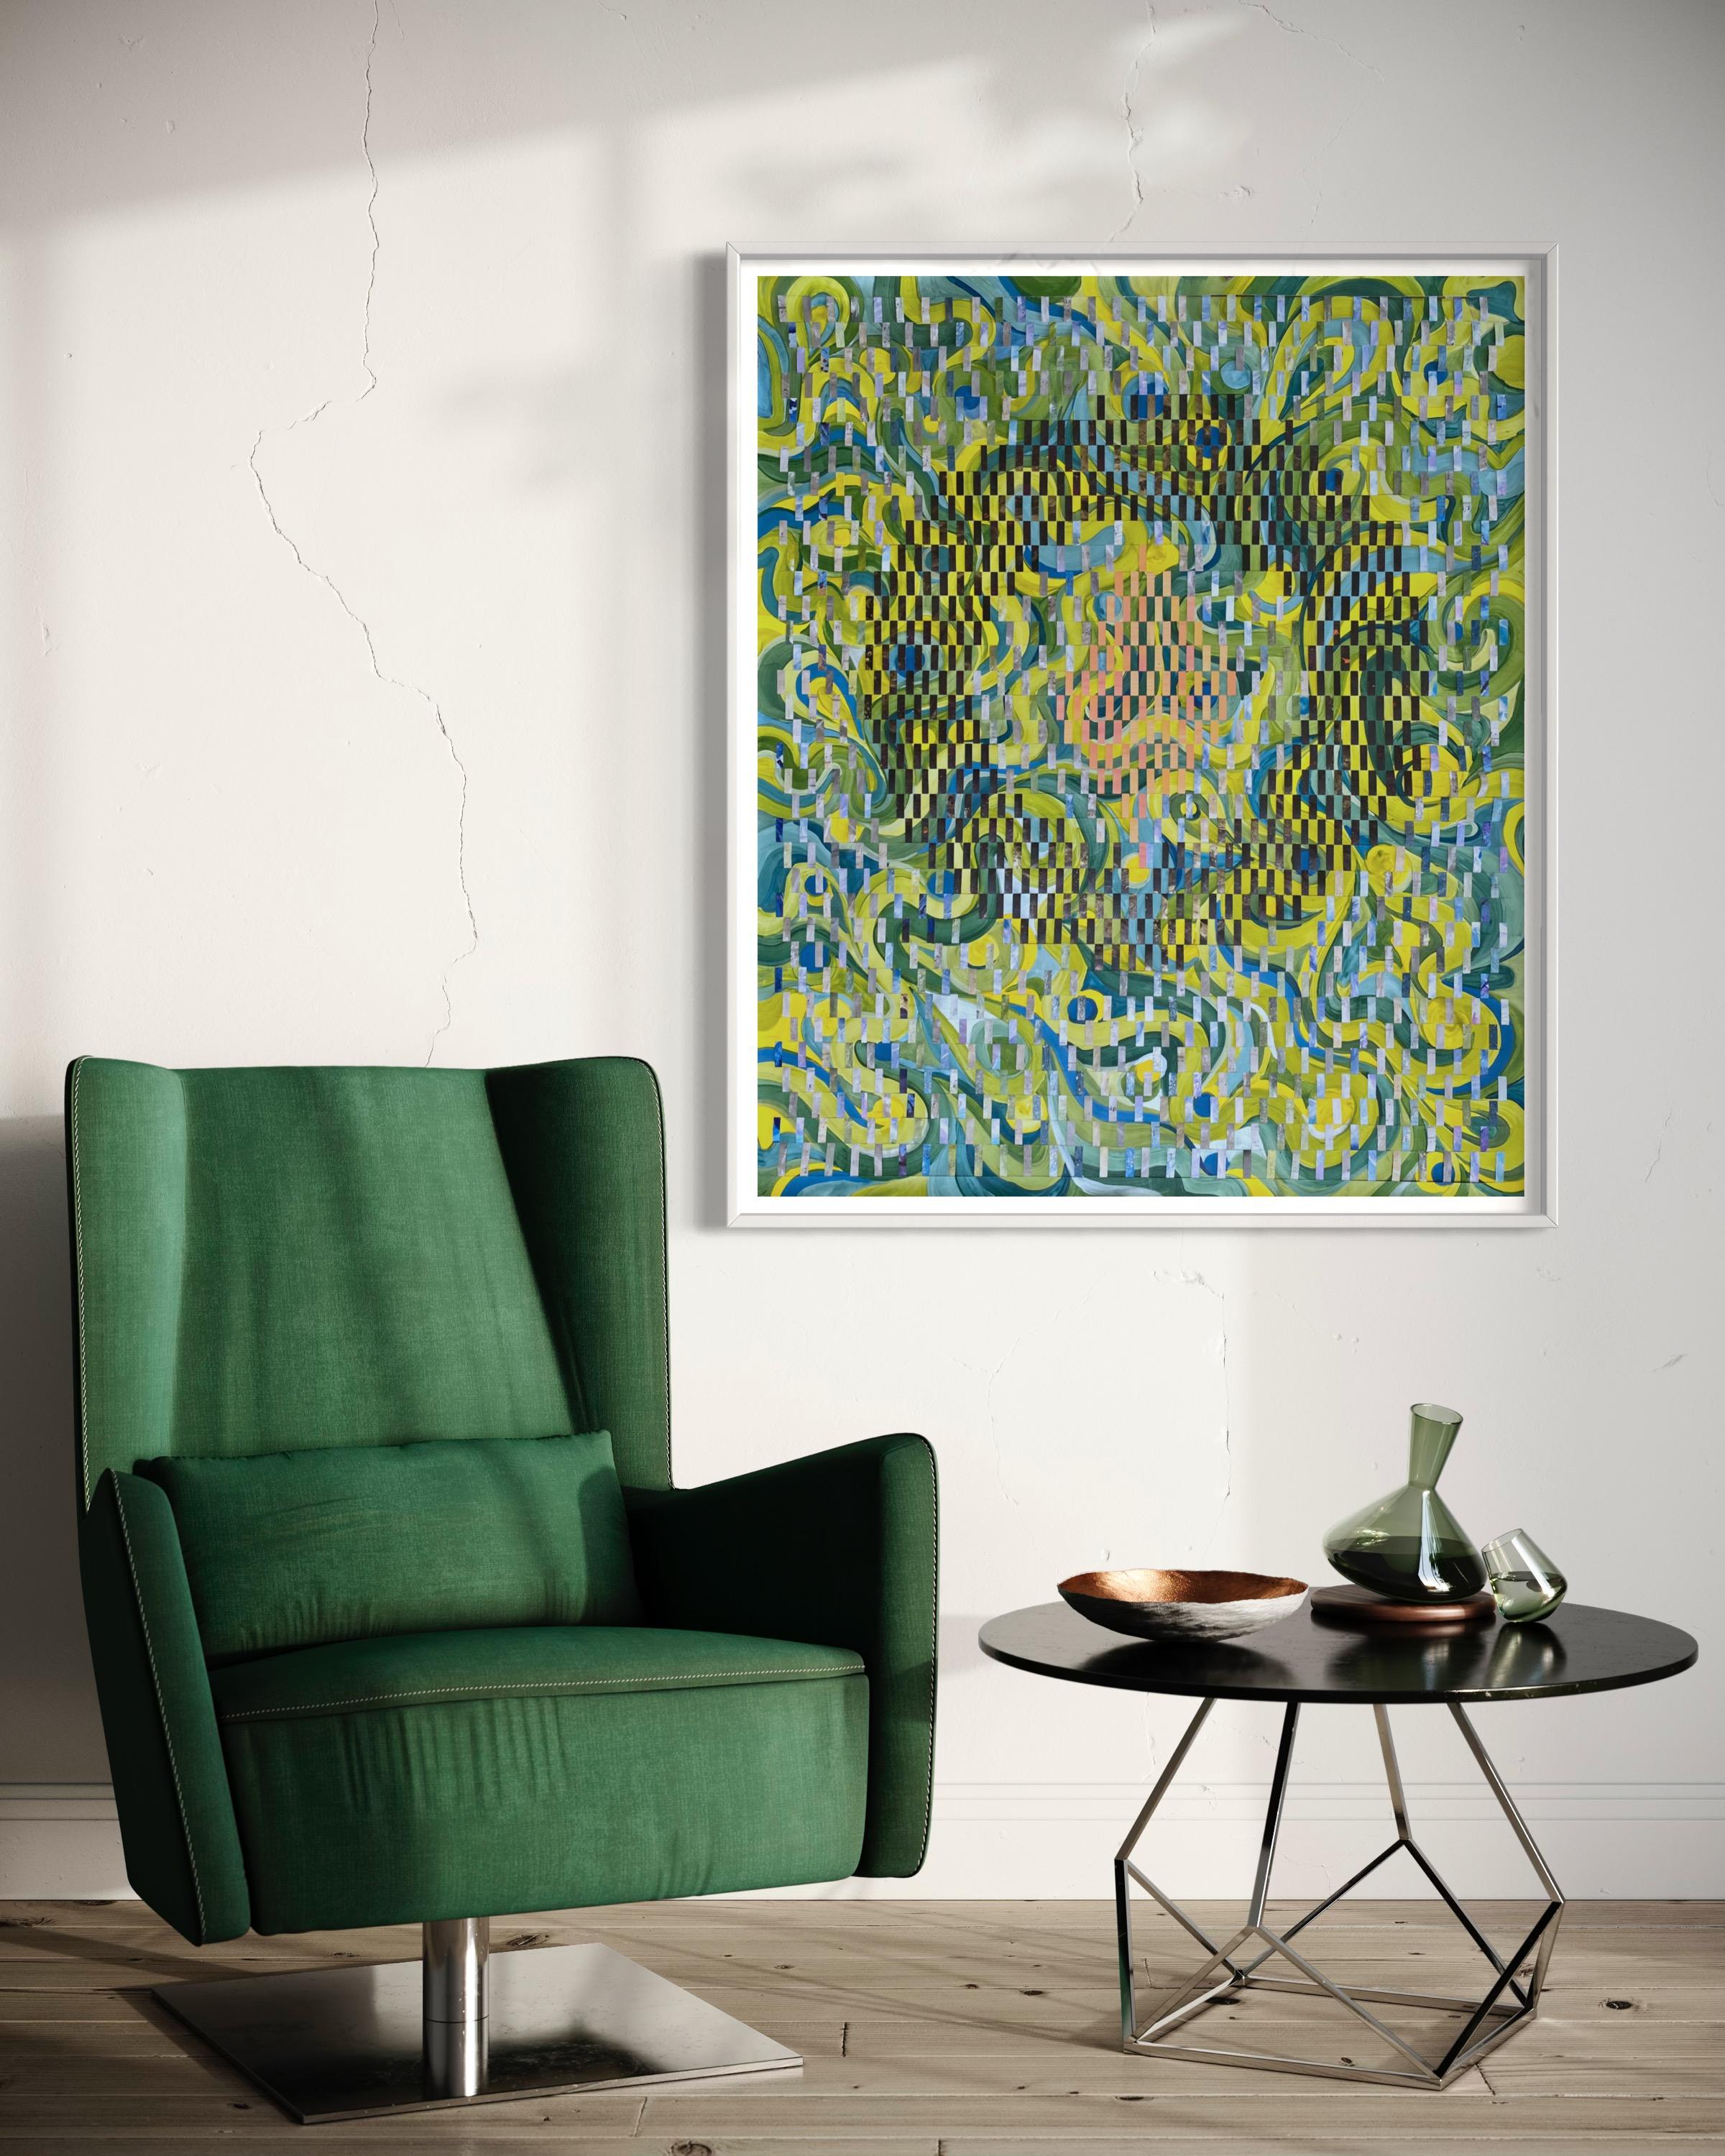 This unique artwork is created through interweaving strips of painted fabriano paper in order to create a complex composition with depth and texture. The artwork is framed and floated to the backboard. The dimensions of 120 x 100 cm are that of the